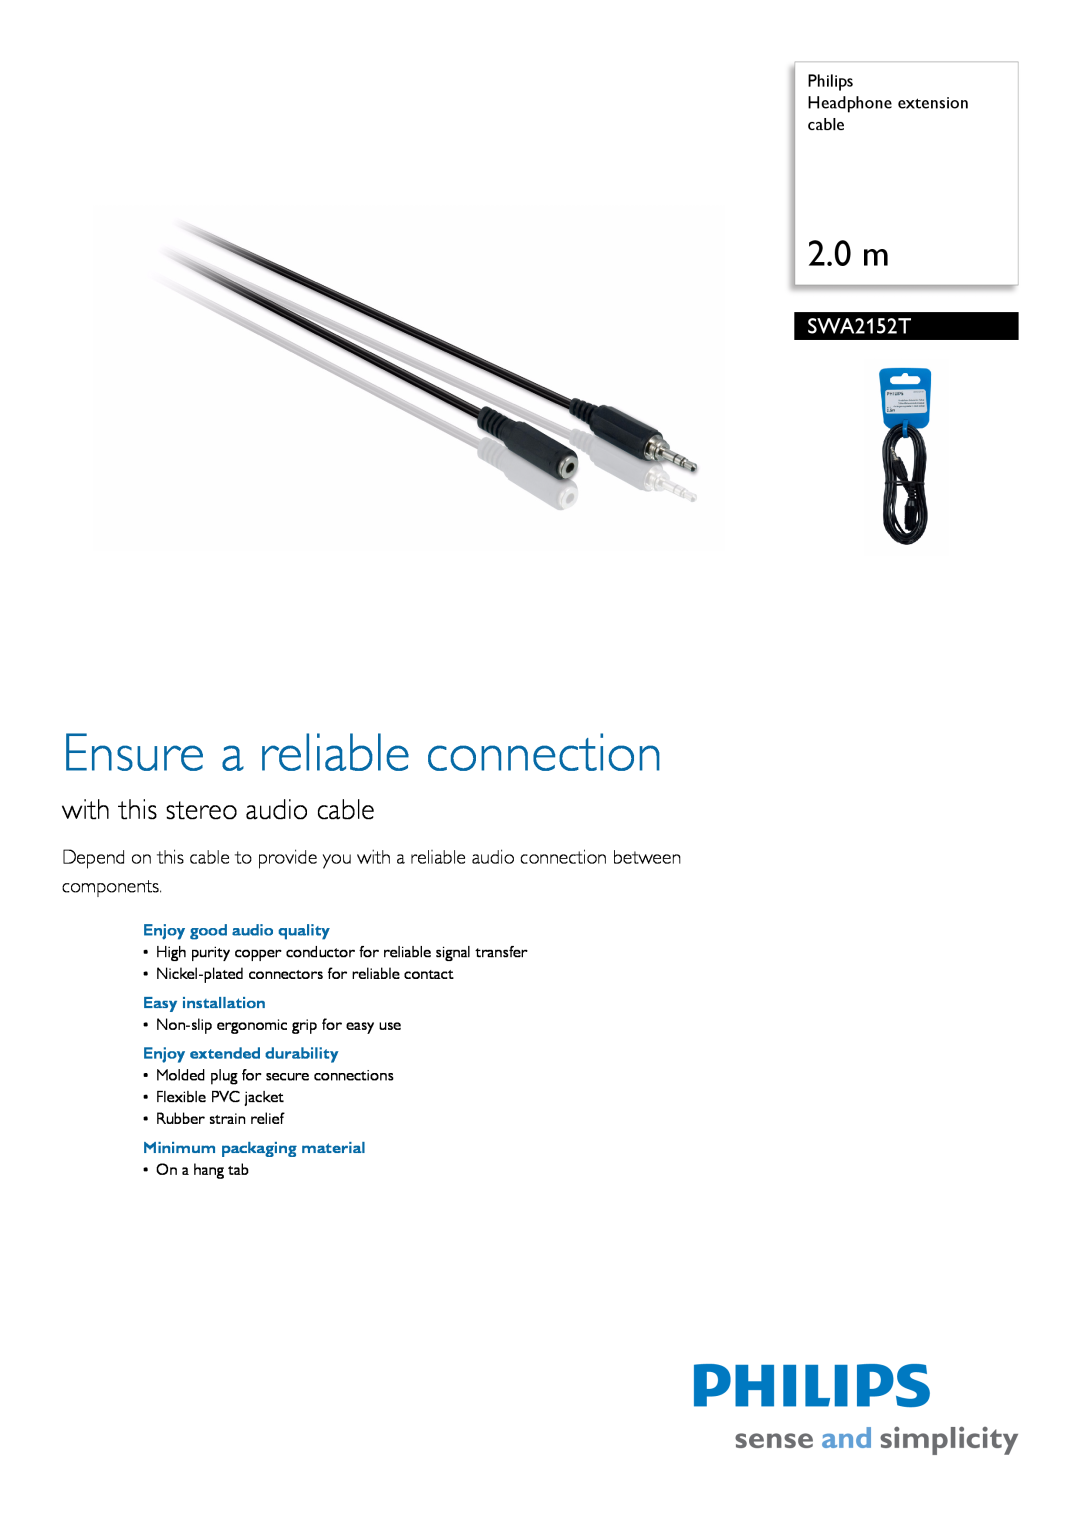 Philips SWA2152T manual Philips Headphone extension cable, Enjoy good audio quality, Easy installation, 2.0 m 